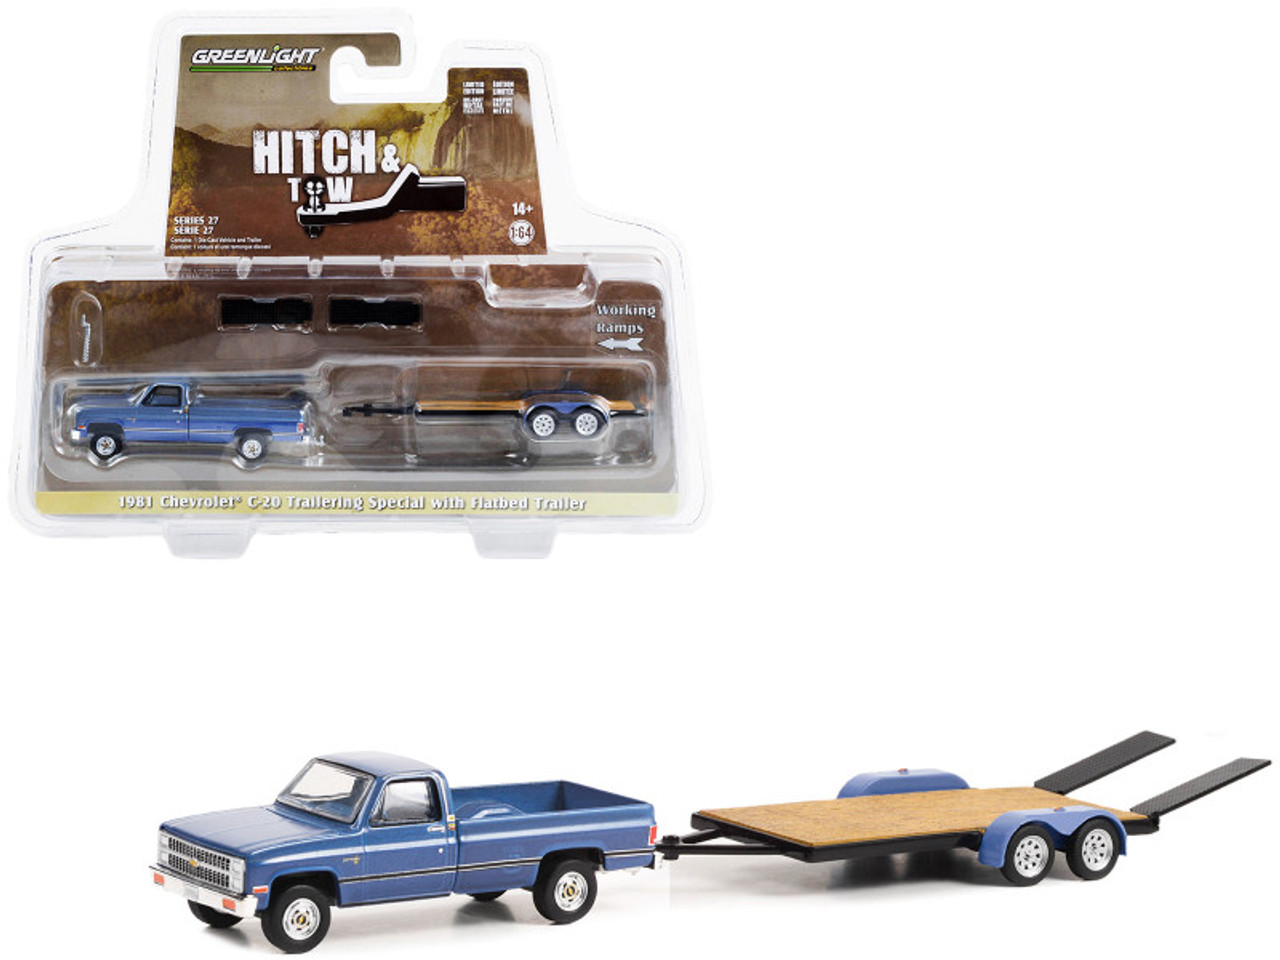 1981 Chevrolet C-20 Trailering Special Pickup Truck Blue with Black Stripes and Flatbed Trailer "Hitch & Tow" Series 27 1/64 Diecast Model Car by Greenlight